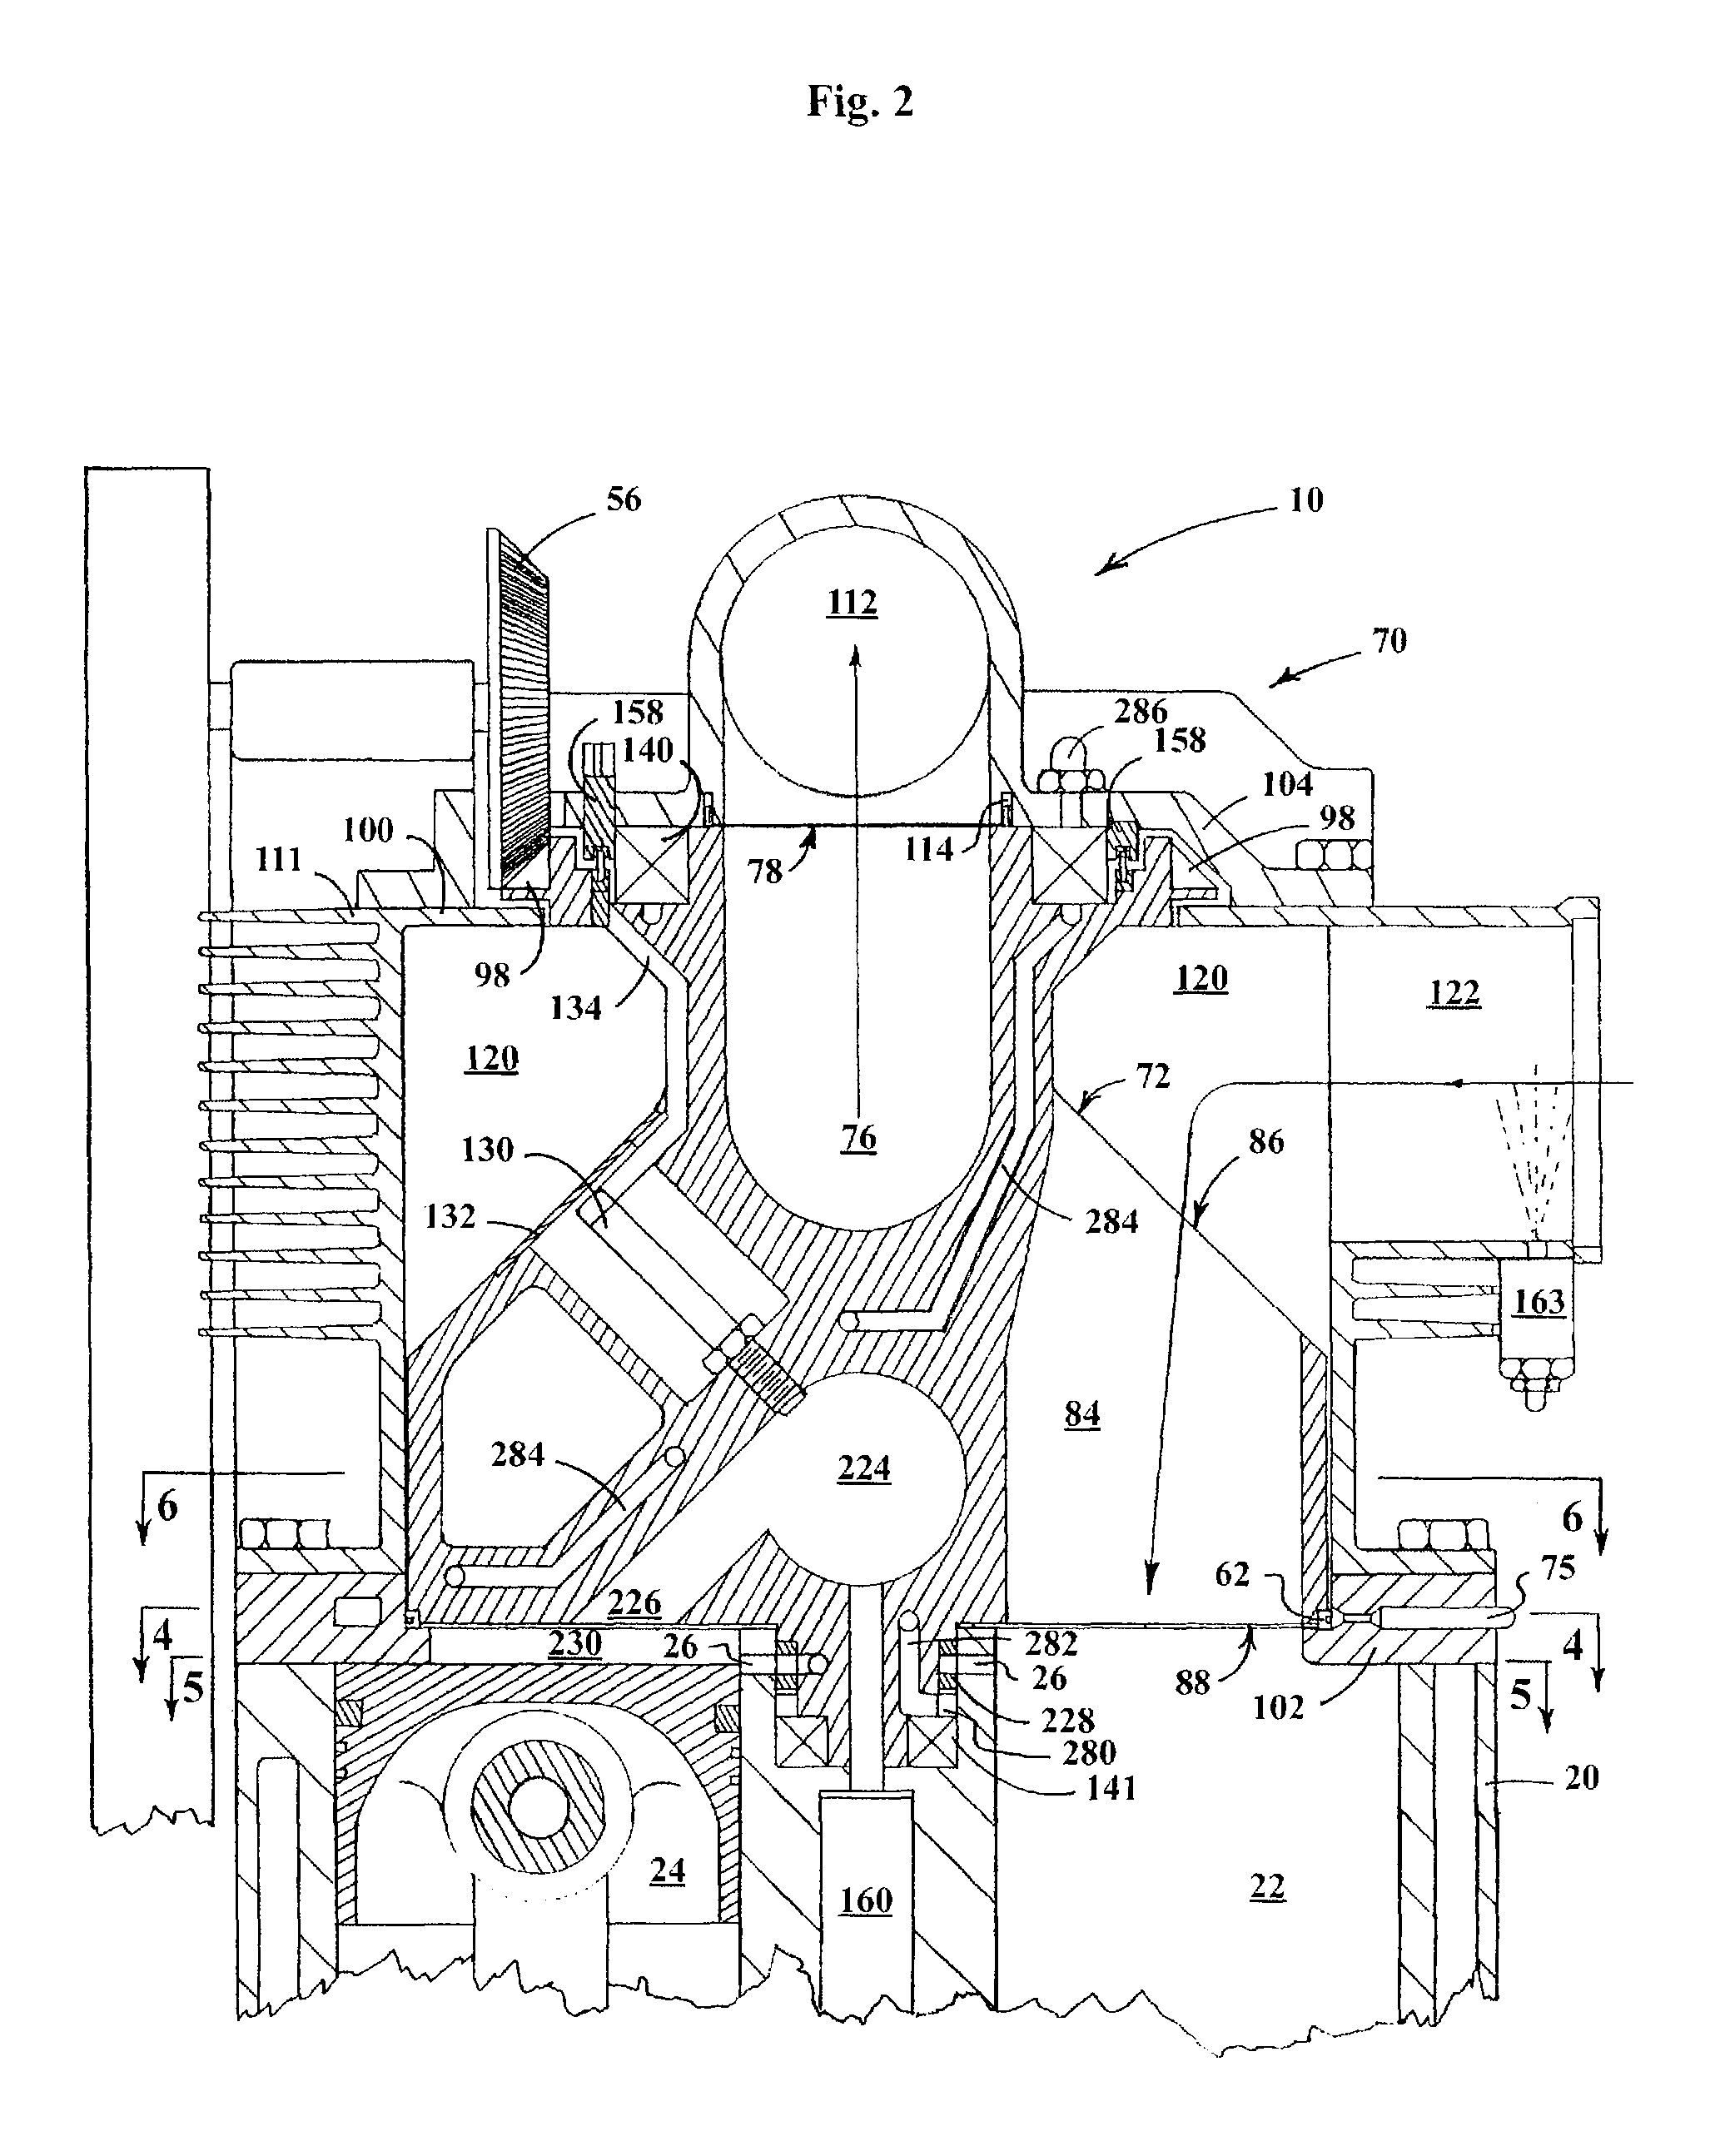 Rotary valve in an internal combustion engine